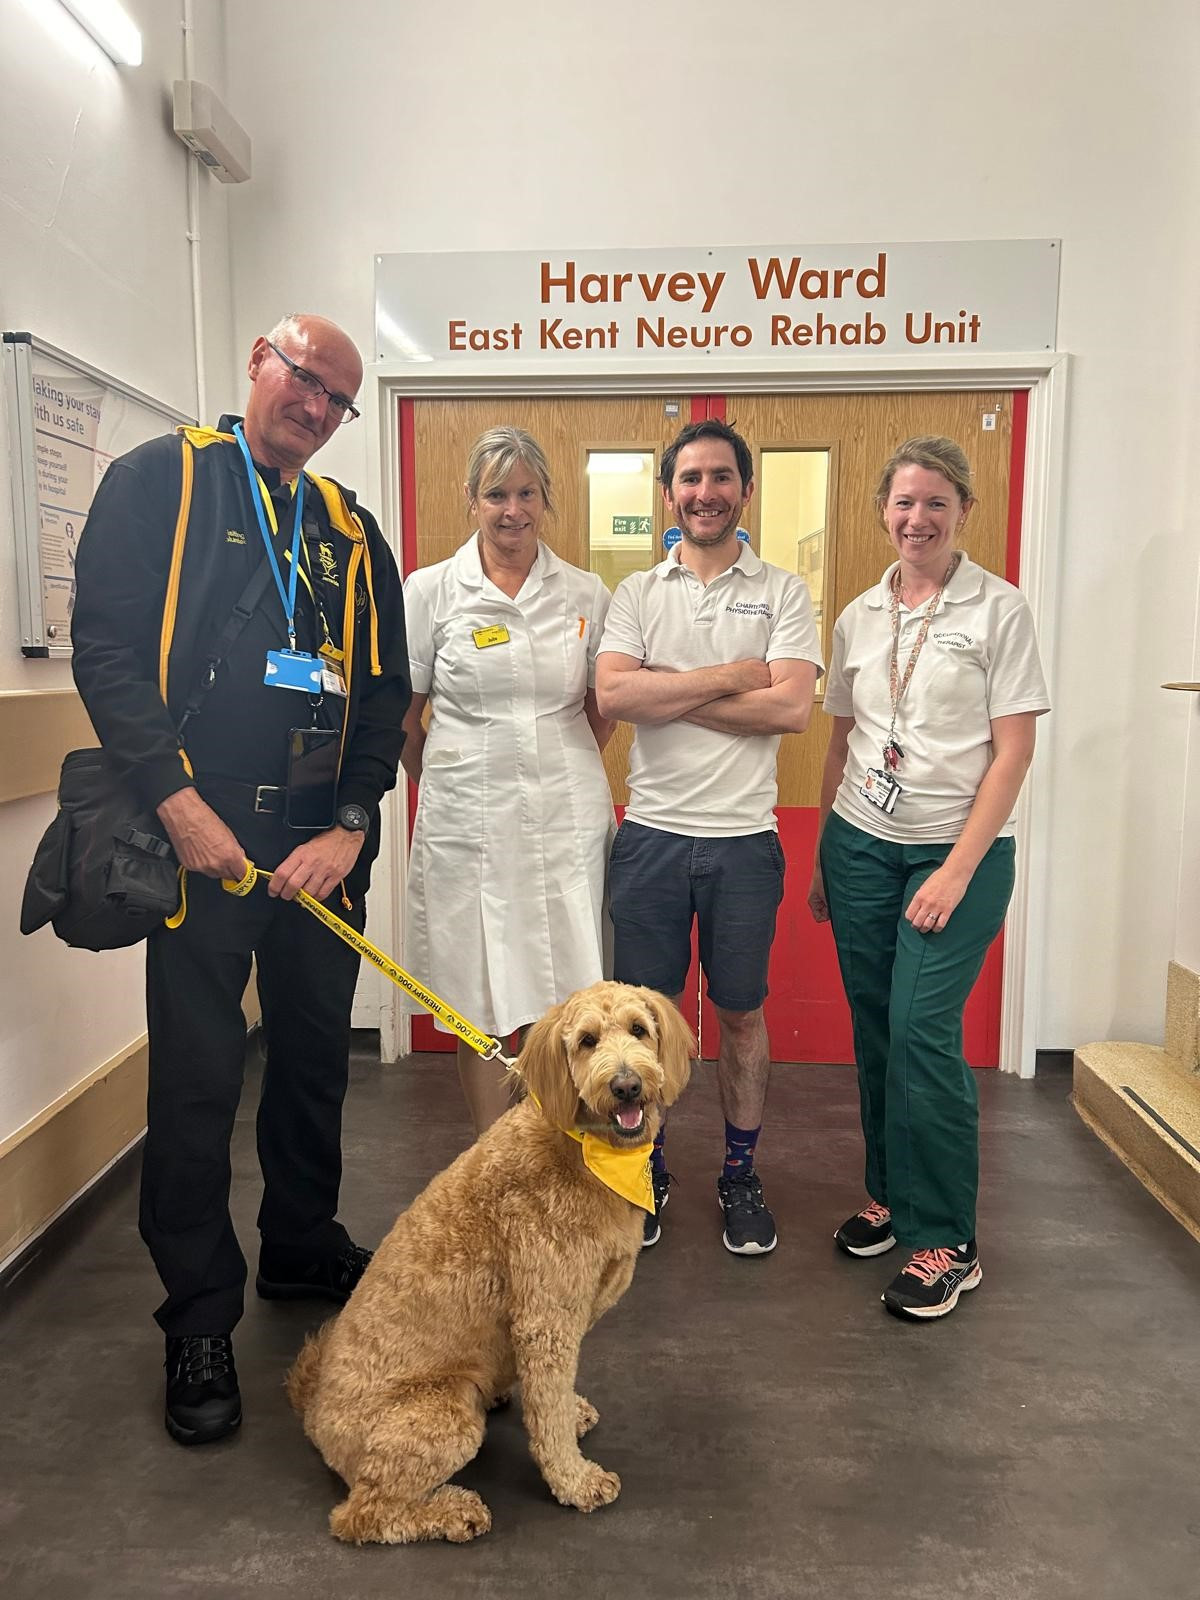 Nigel and Martha the dog with some of the team from Harvey ward where he was a patient